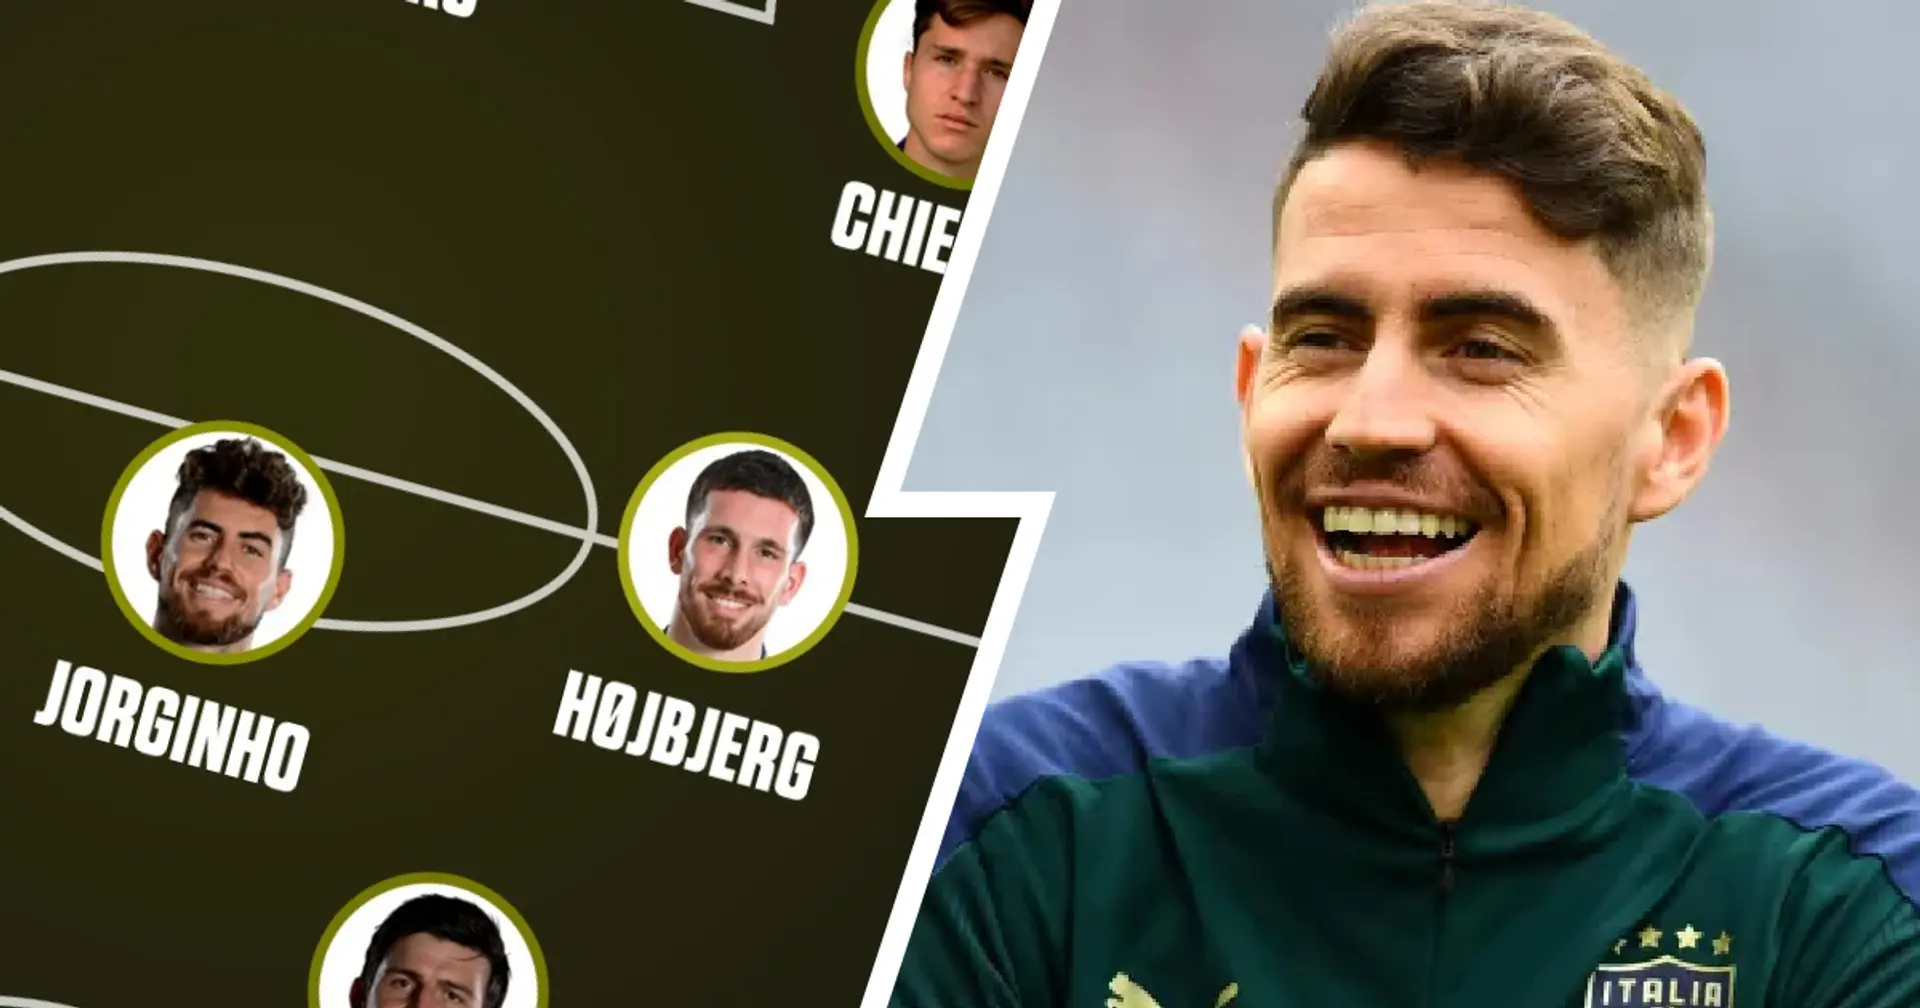 Jorginho selected for Euro 2020 Team of the Tournament, Mount misses out